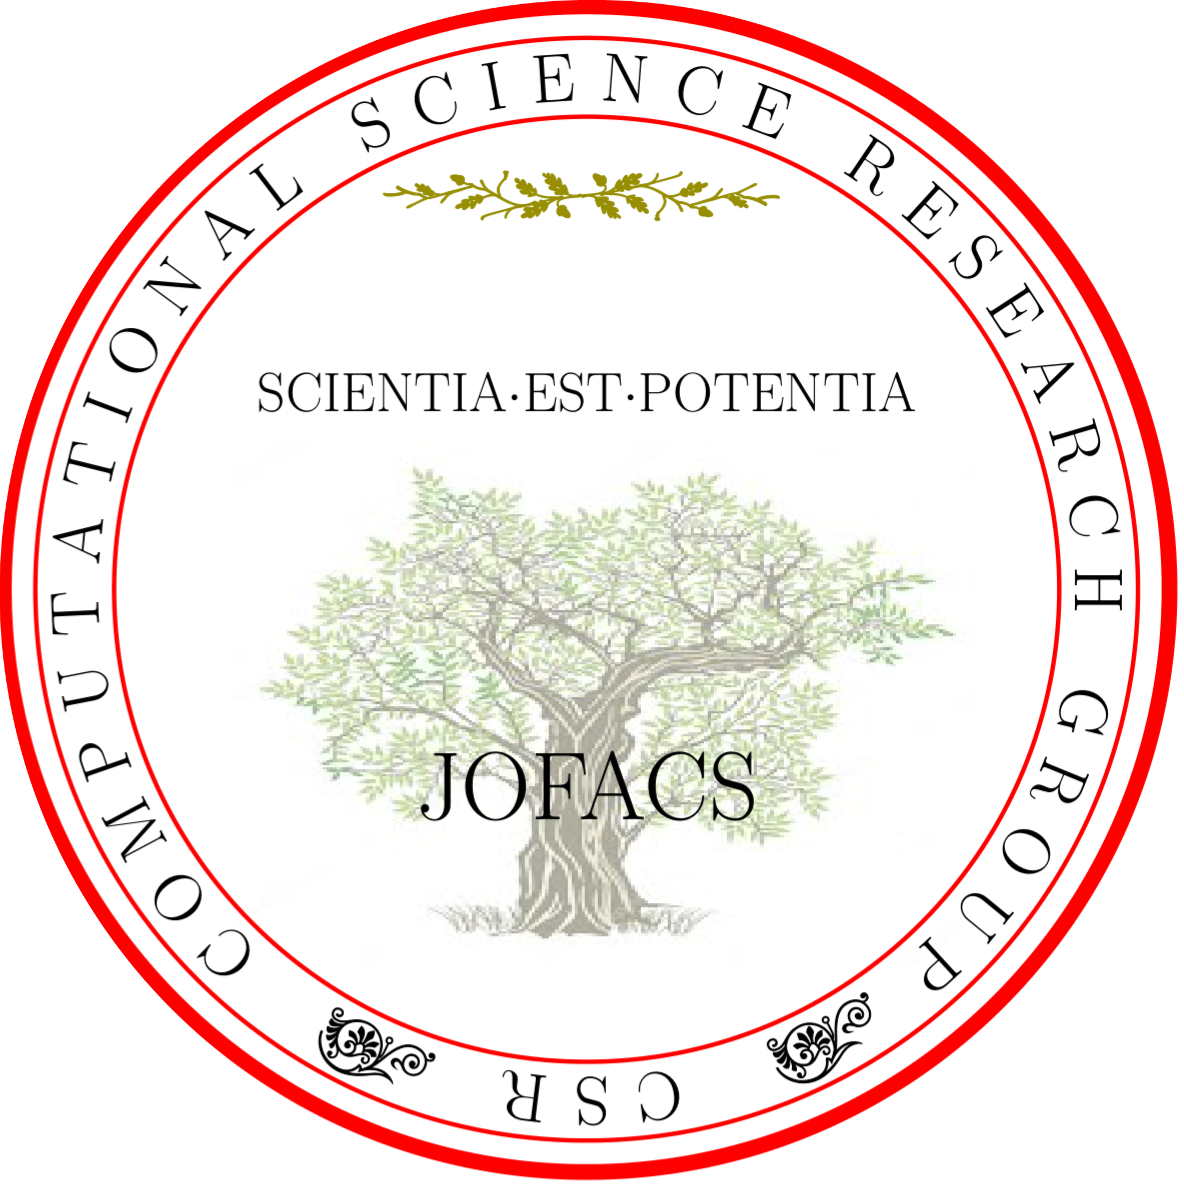 Journal of Applied and Computational Sciences